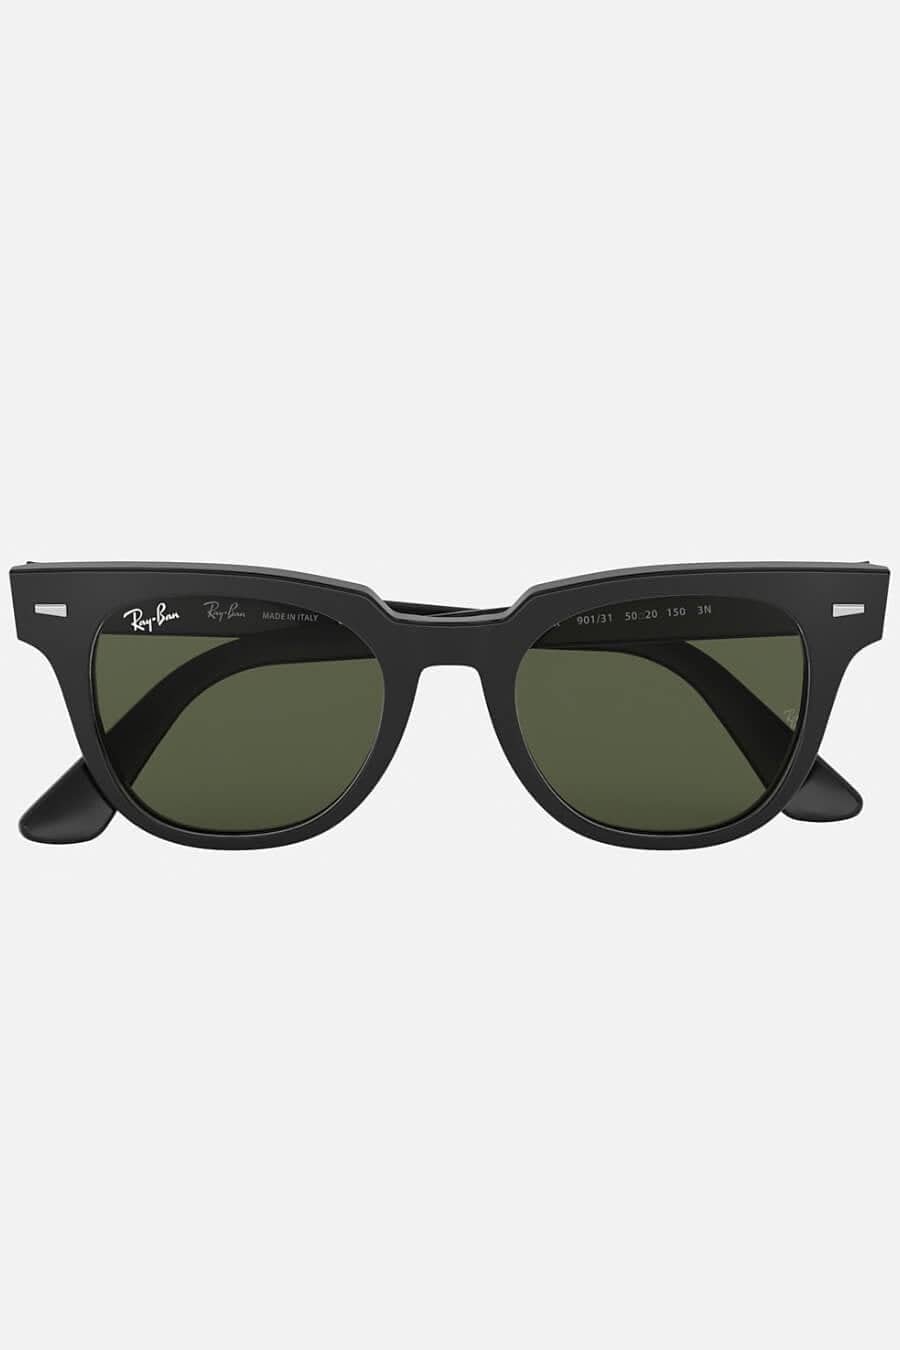 Ray-Ban RB2168 901/31 Meteor Classic